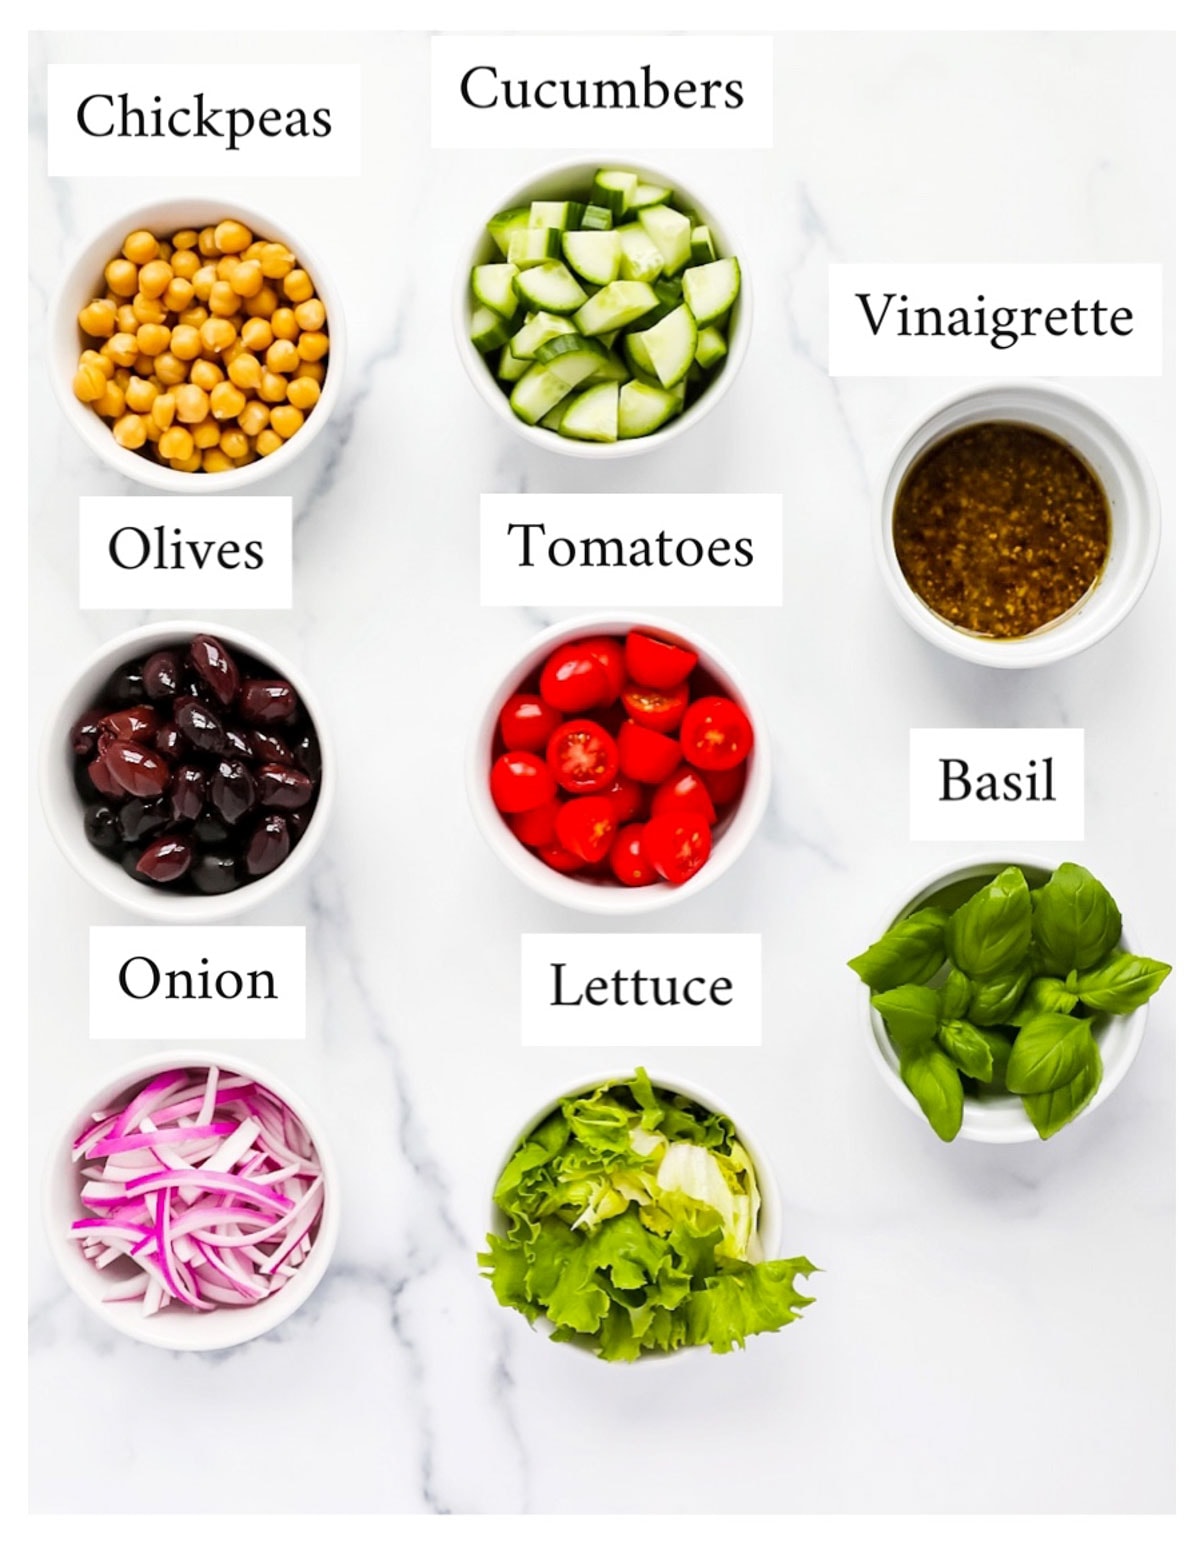 Labeled ingredients including: chickpeas, cucumbers, olives, tomatoes, vinaigrette, basil, lettuce, and onion